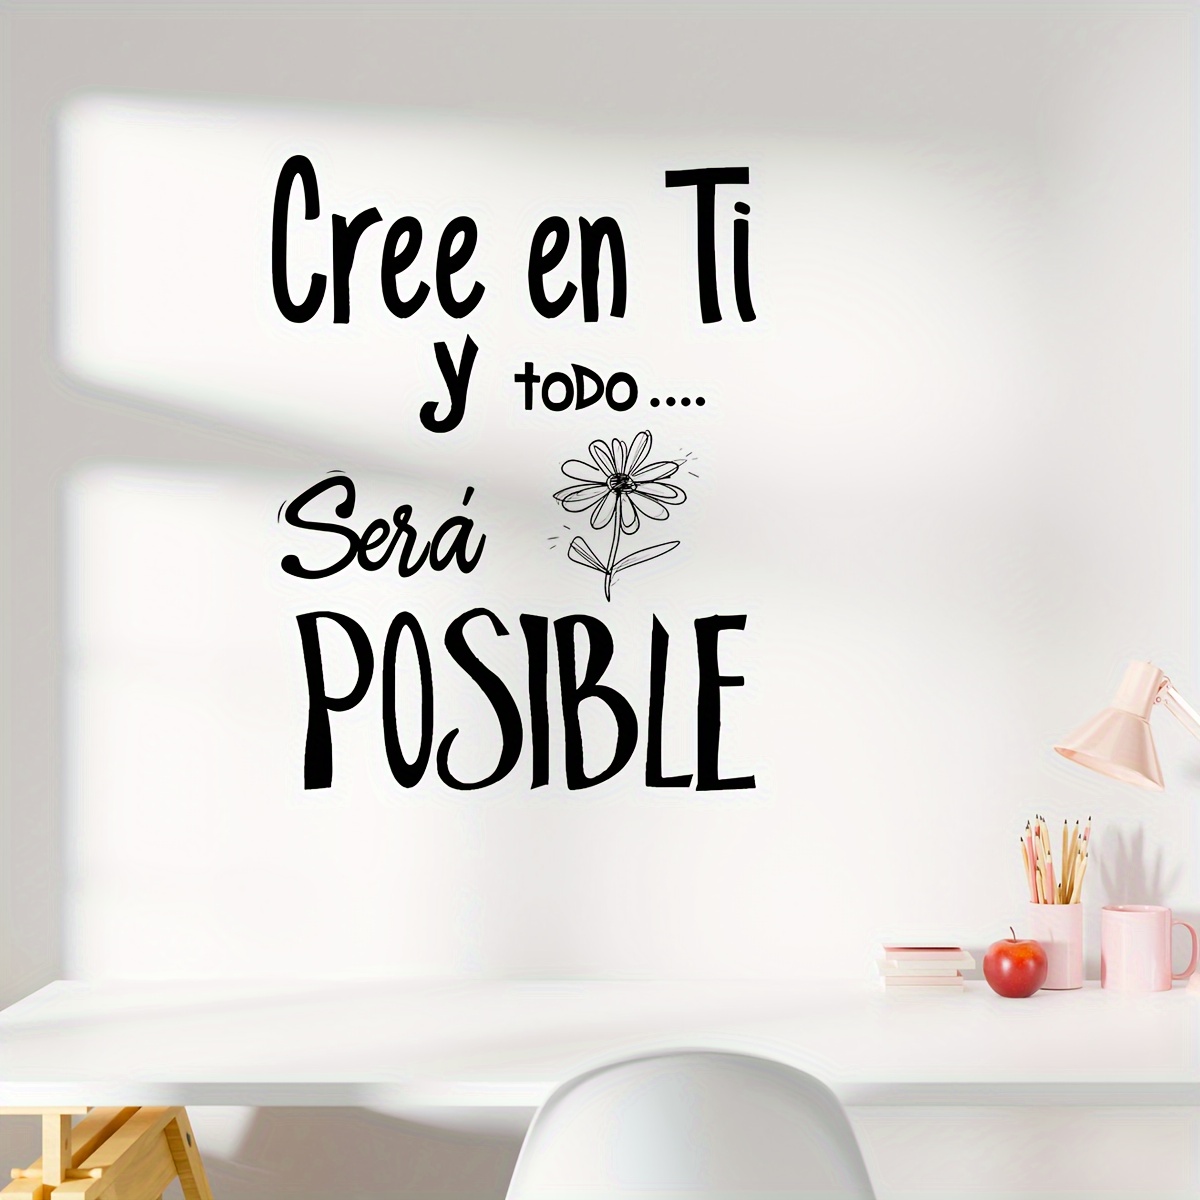 

Inspirational Spanish Quote Wall Decal - Vinyl, Removable Art Sticker For Bedroom, Living Room, Home Office & Dining Area